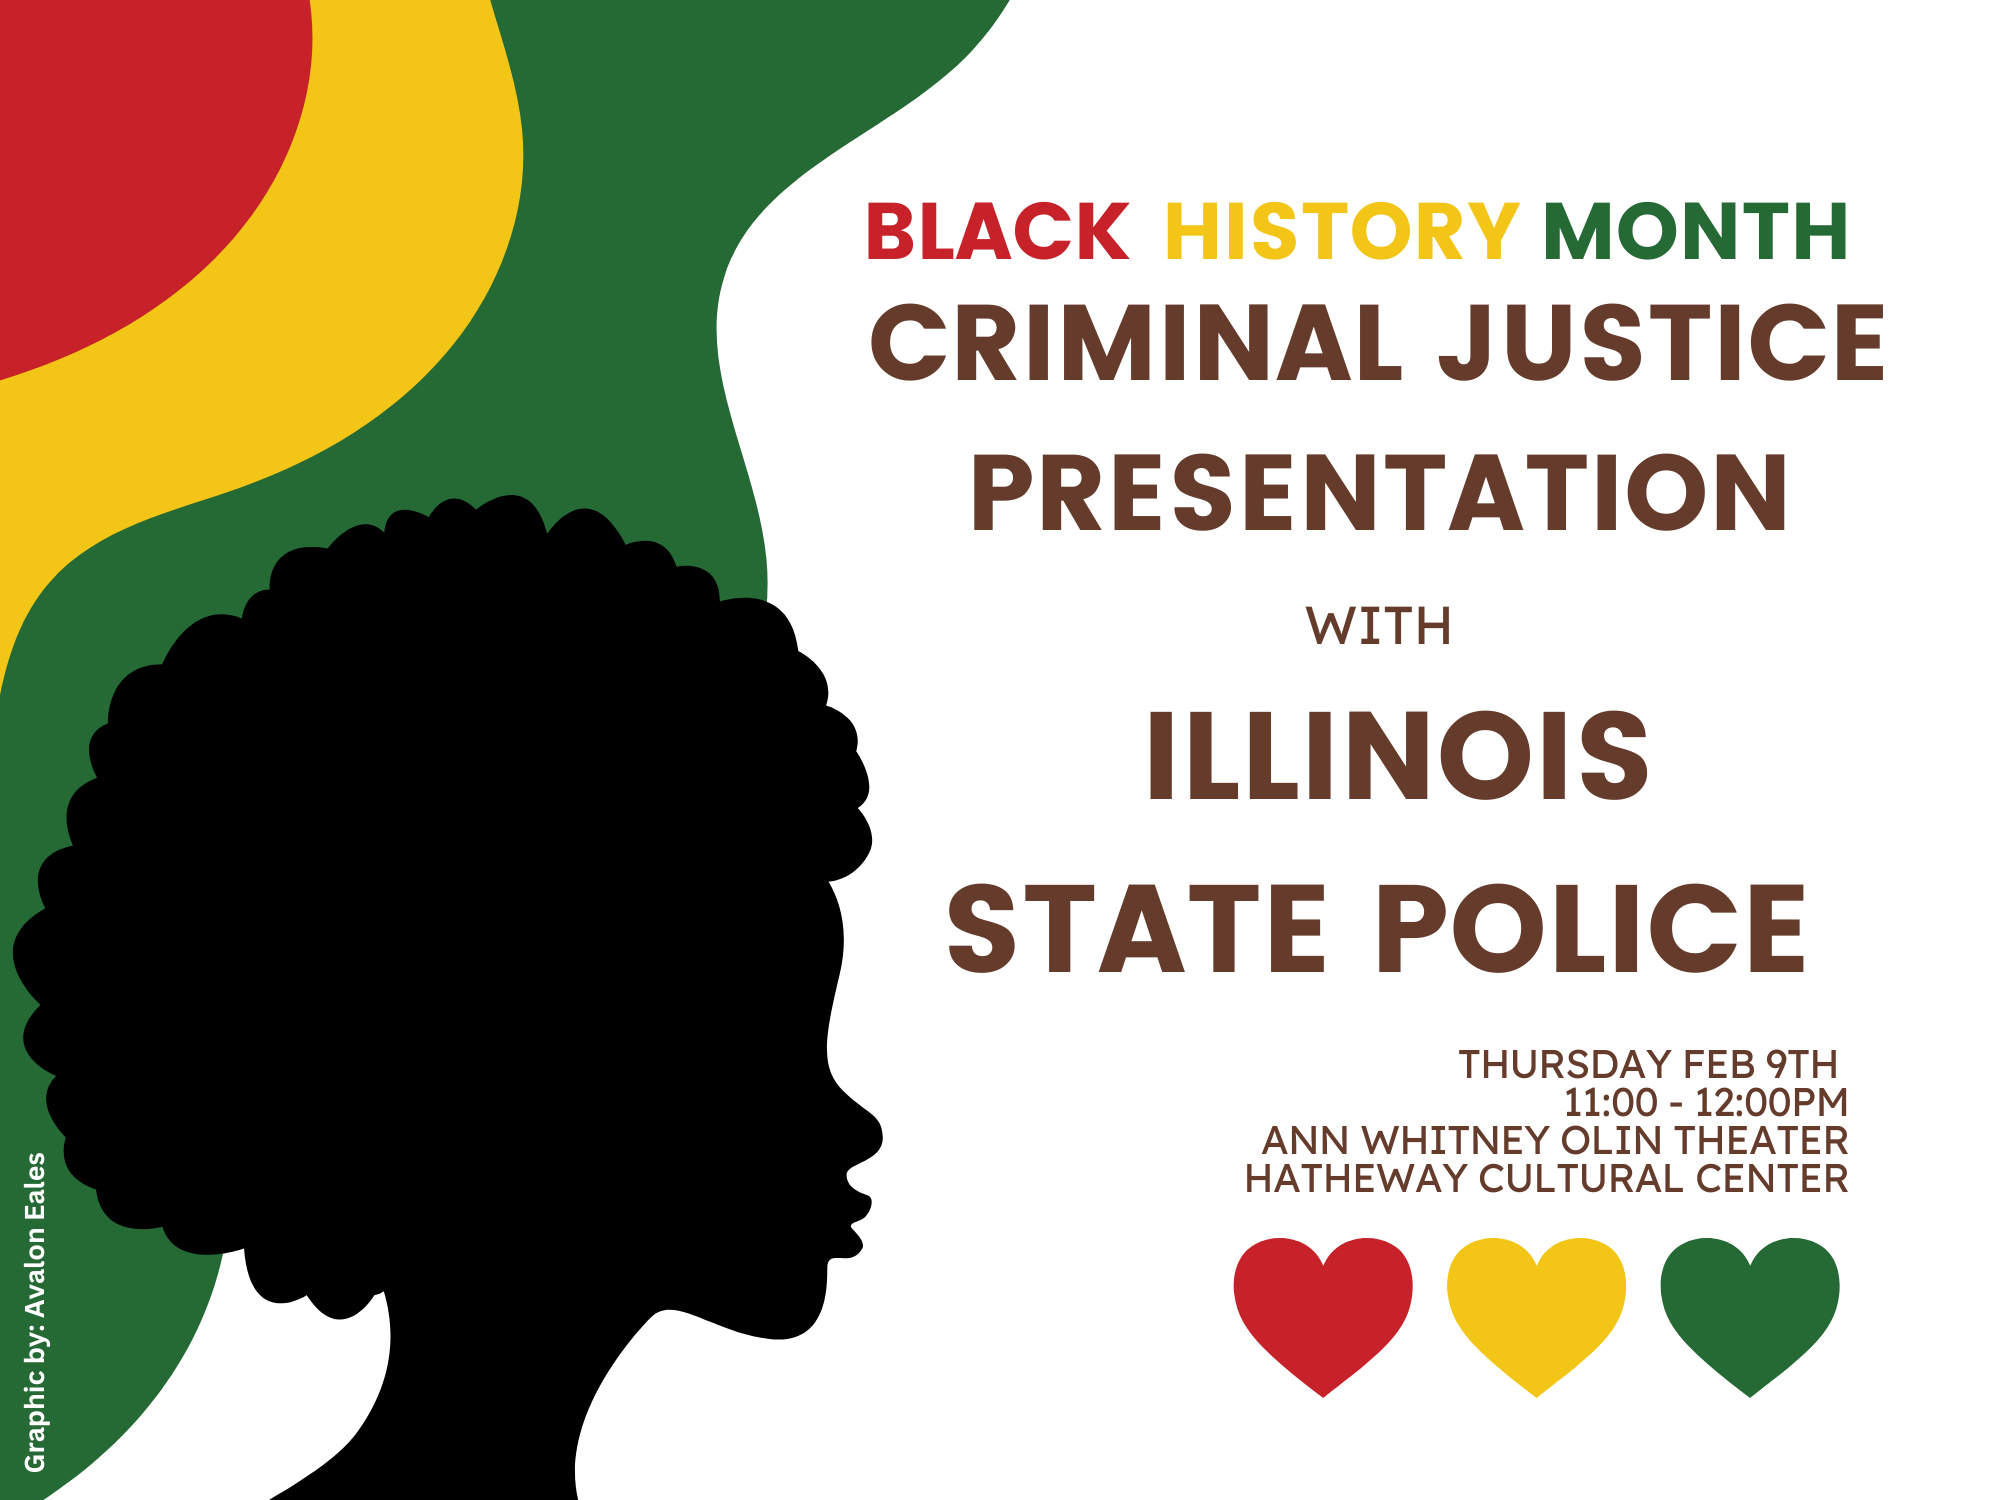 Black History Month Criminal Justice Presentation with Illinois State Police. Thursday, February 9th, 11:00 am to 12:00 pm. Ann Whitney Olin Theater in Hathaway Cultural Center.